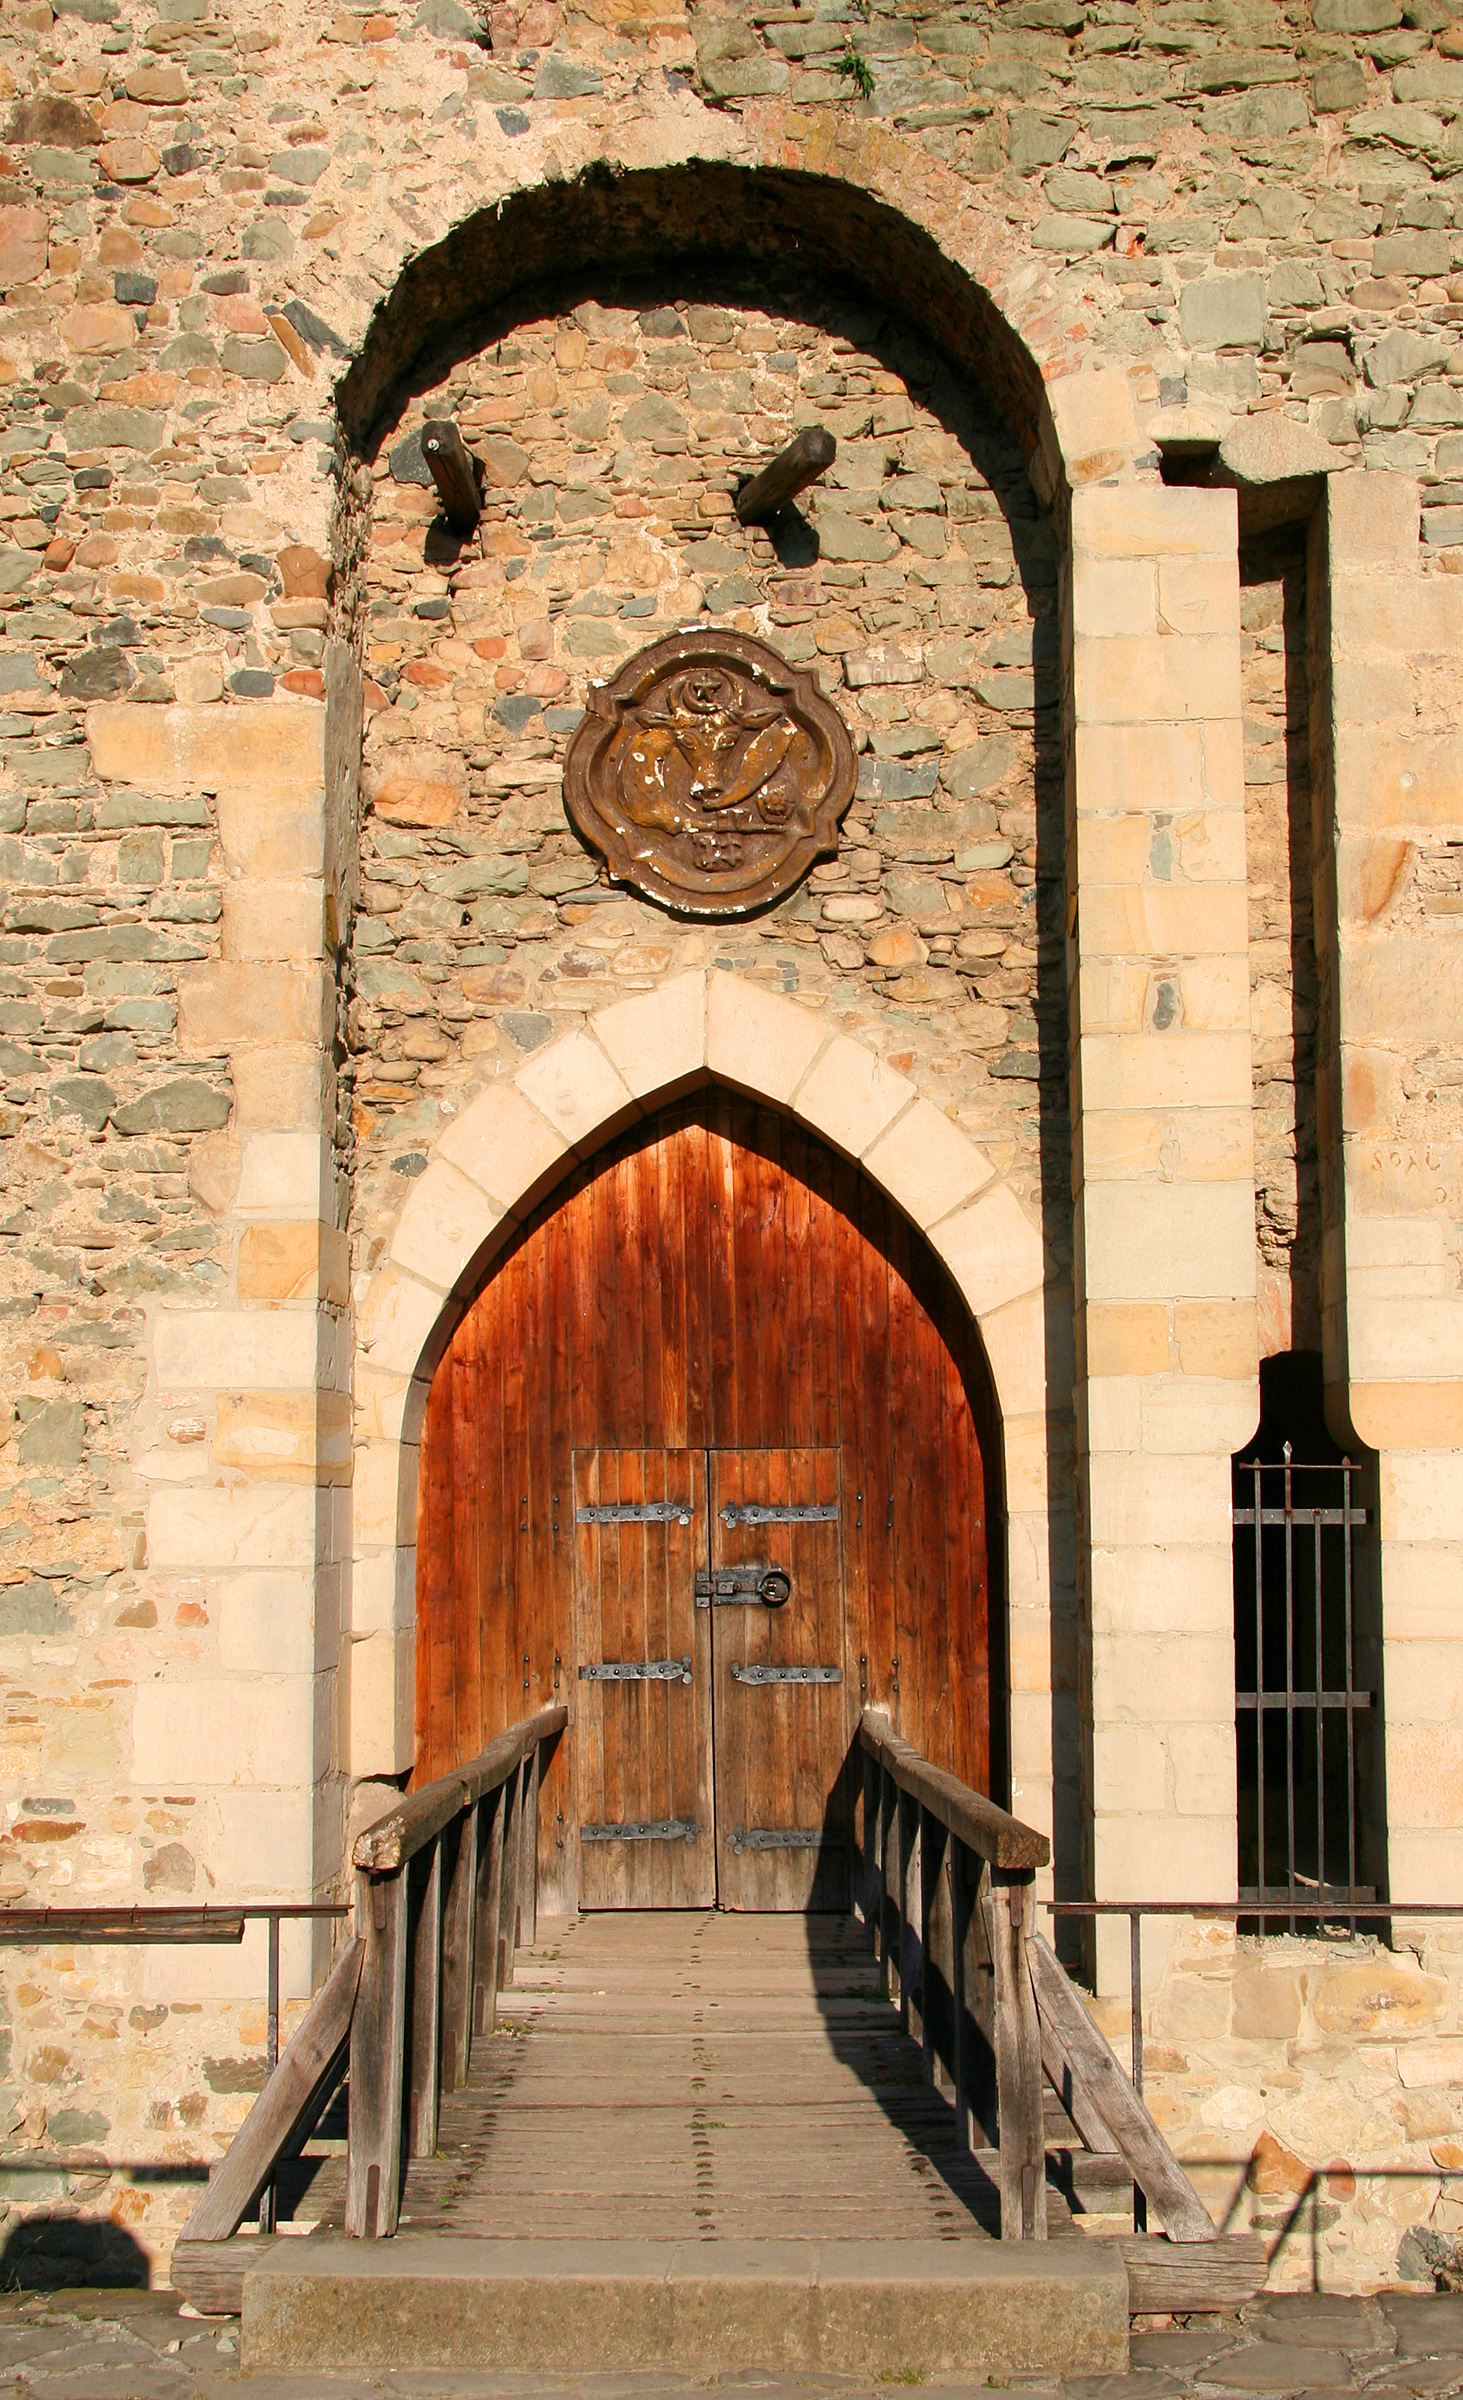 Wooden gate of an medieval building